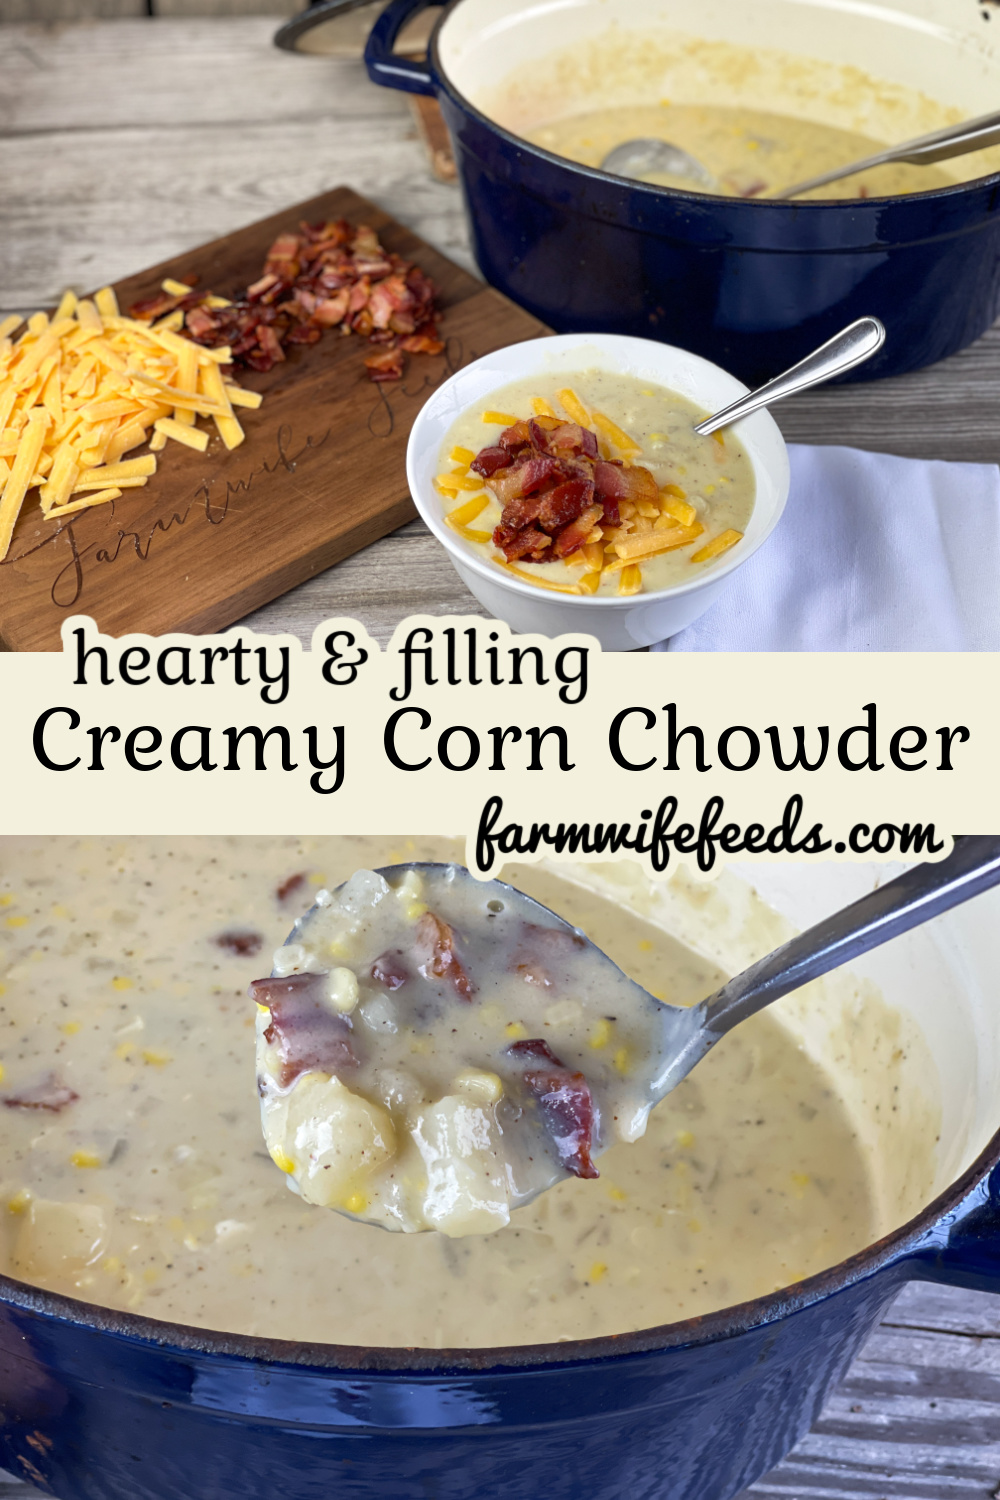 Creamy Corn Chowder from Farmwife Feeds. A hearty and filling meal with bacon and cheese for an ultimate comfort food. #chowder #corn #bacon #soup